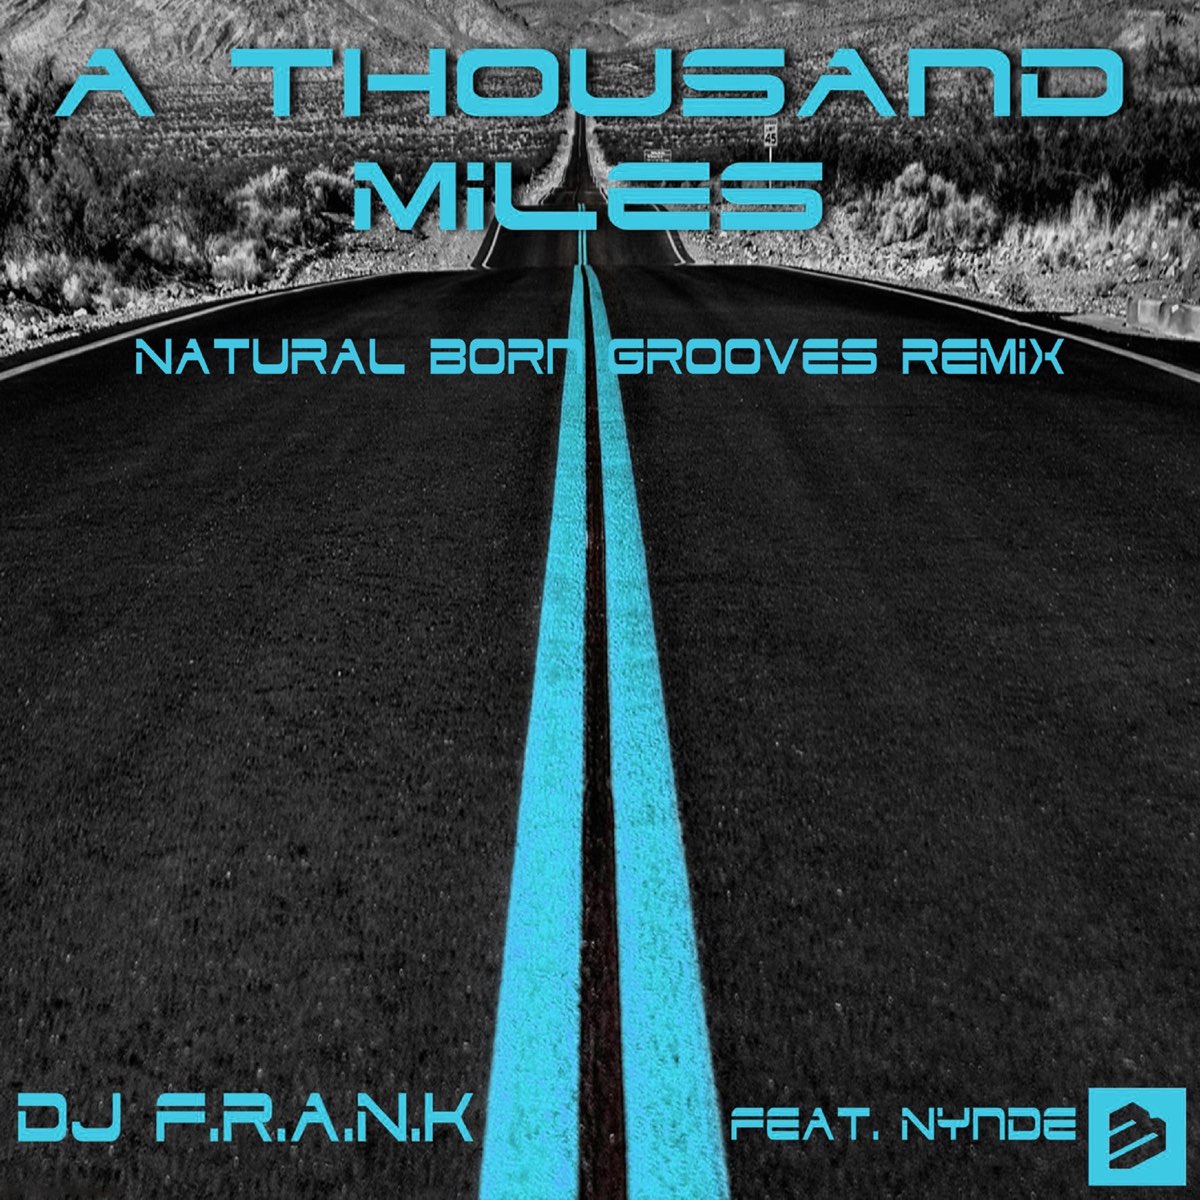 Soft blade yugoslavskiy groove remix. DJ F.R.A.N.K. Thoba & Kate Miles your Love. A Thousand Miles ft Terry. Bea Groves.